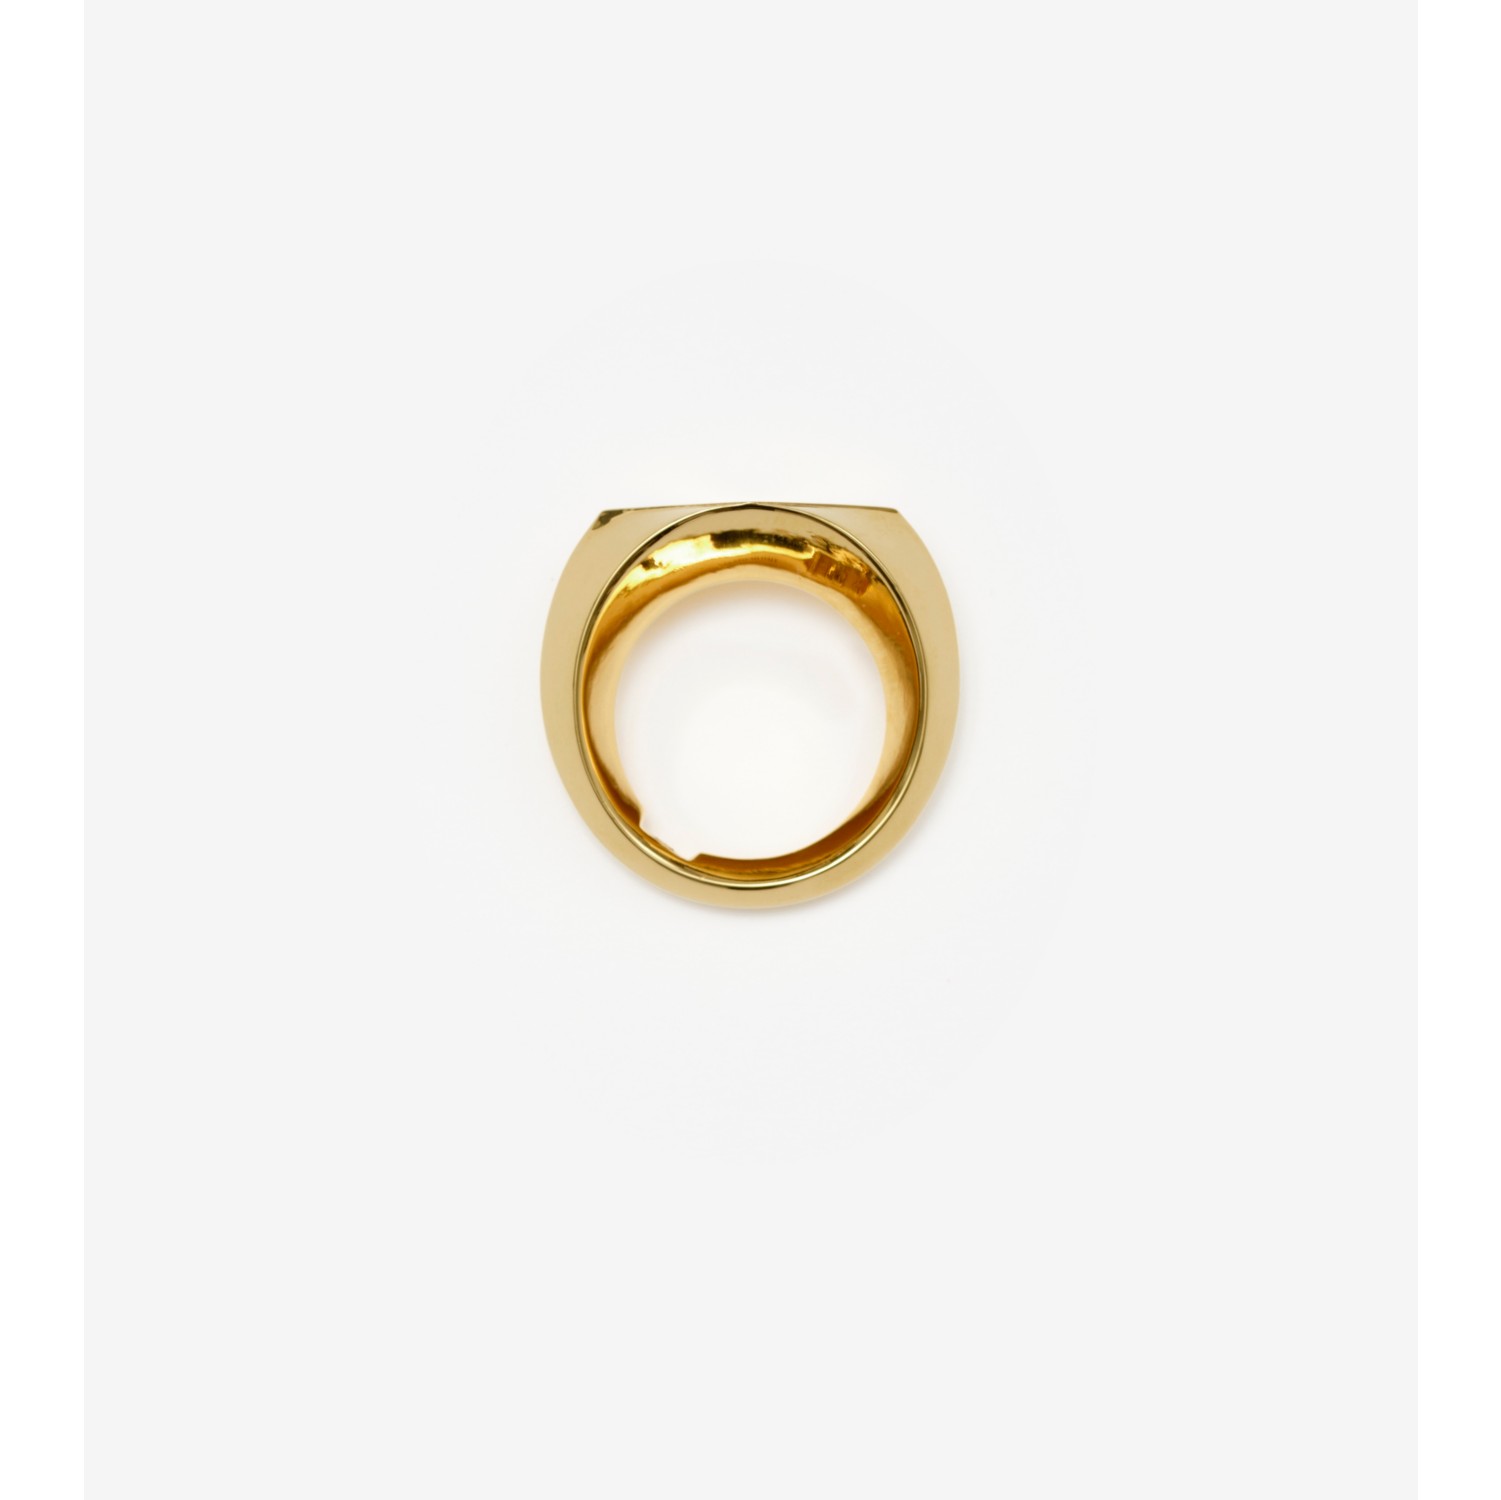 Burberry - Hollow Gold-Plated Ring - Women - Gold Plated Silver - 51